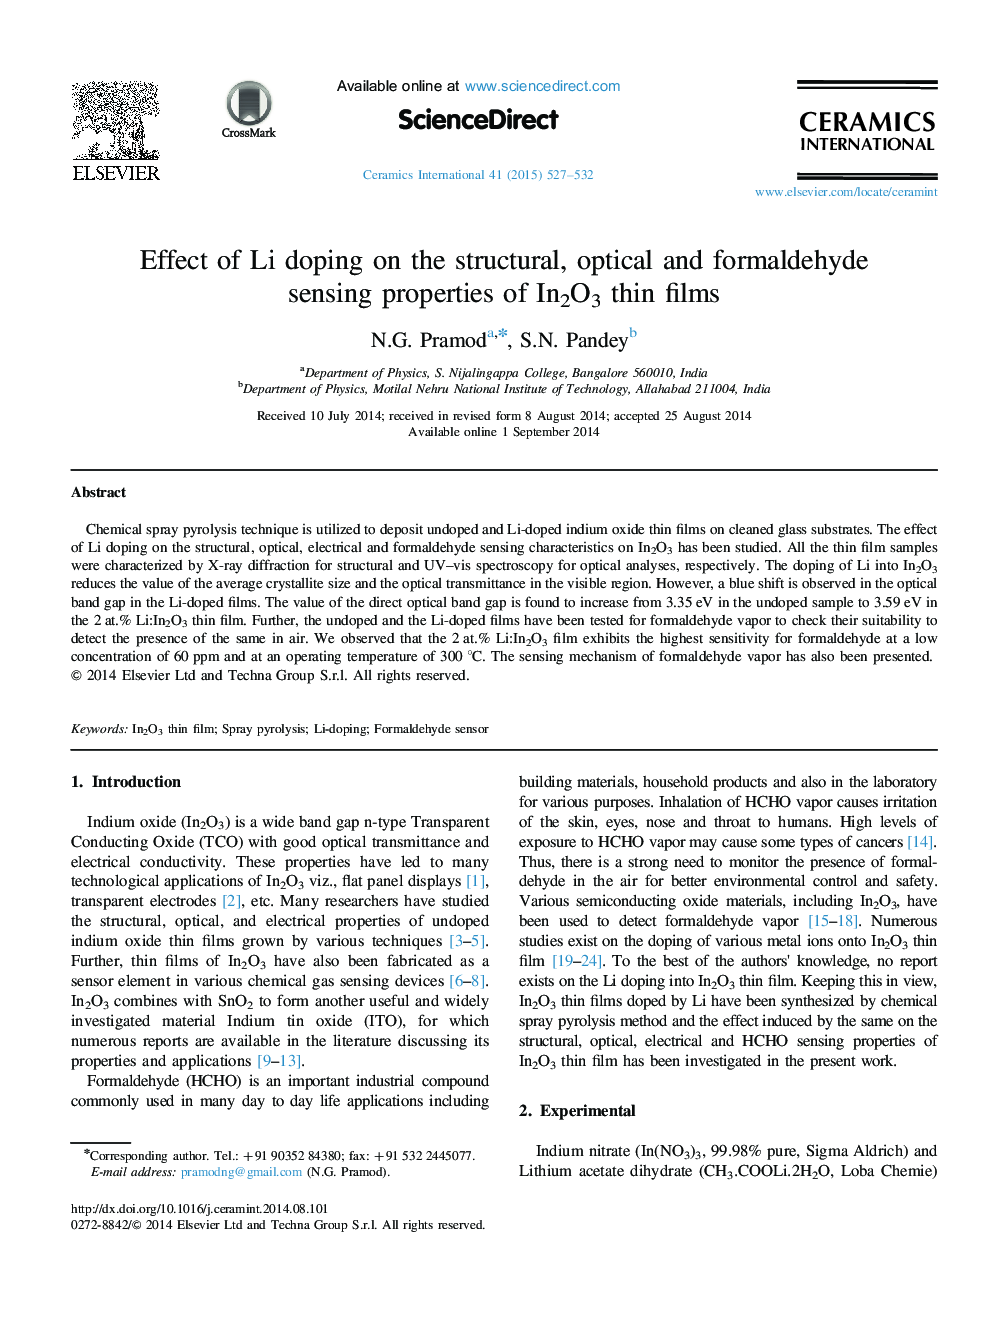 Effect of Li doping on the structural, optical and formaldehyde sensing properties of In2O3 thin films